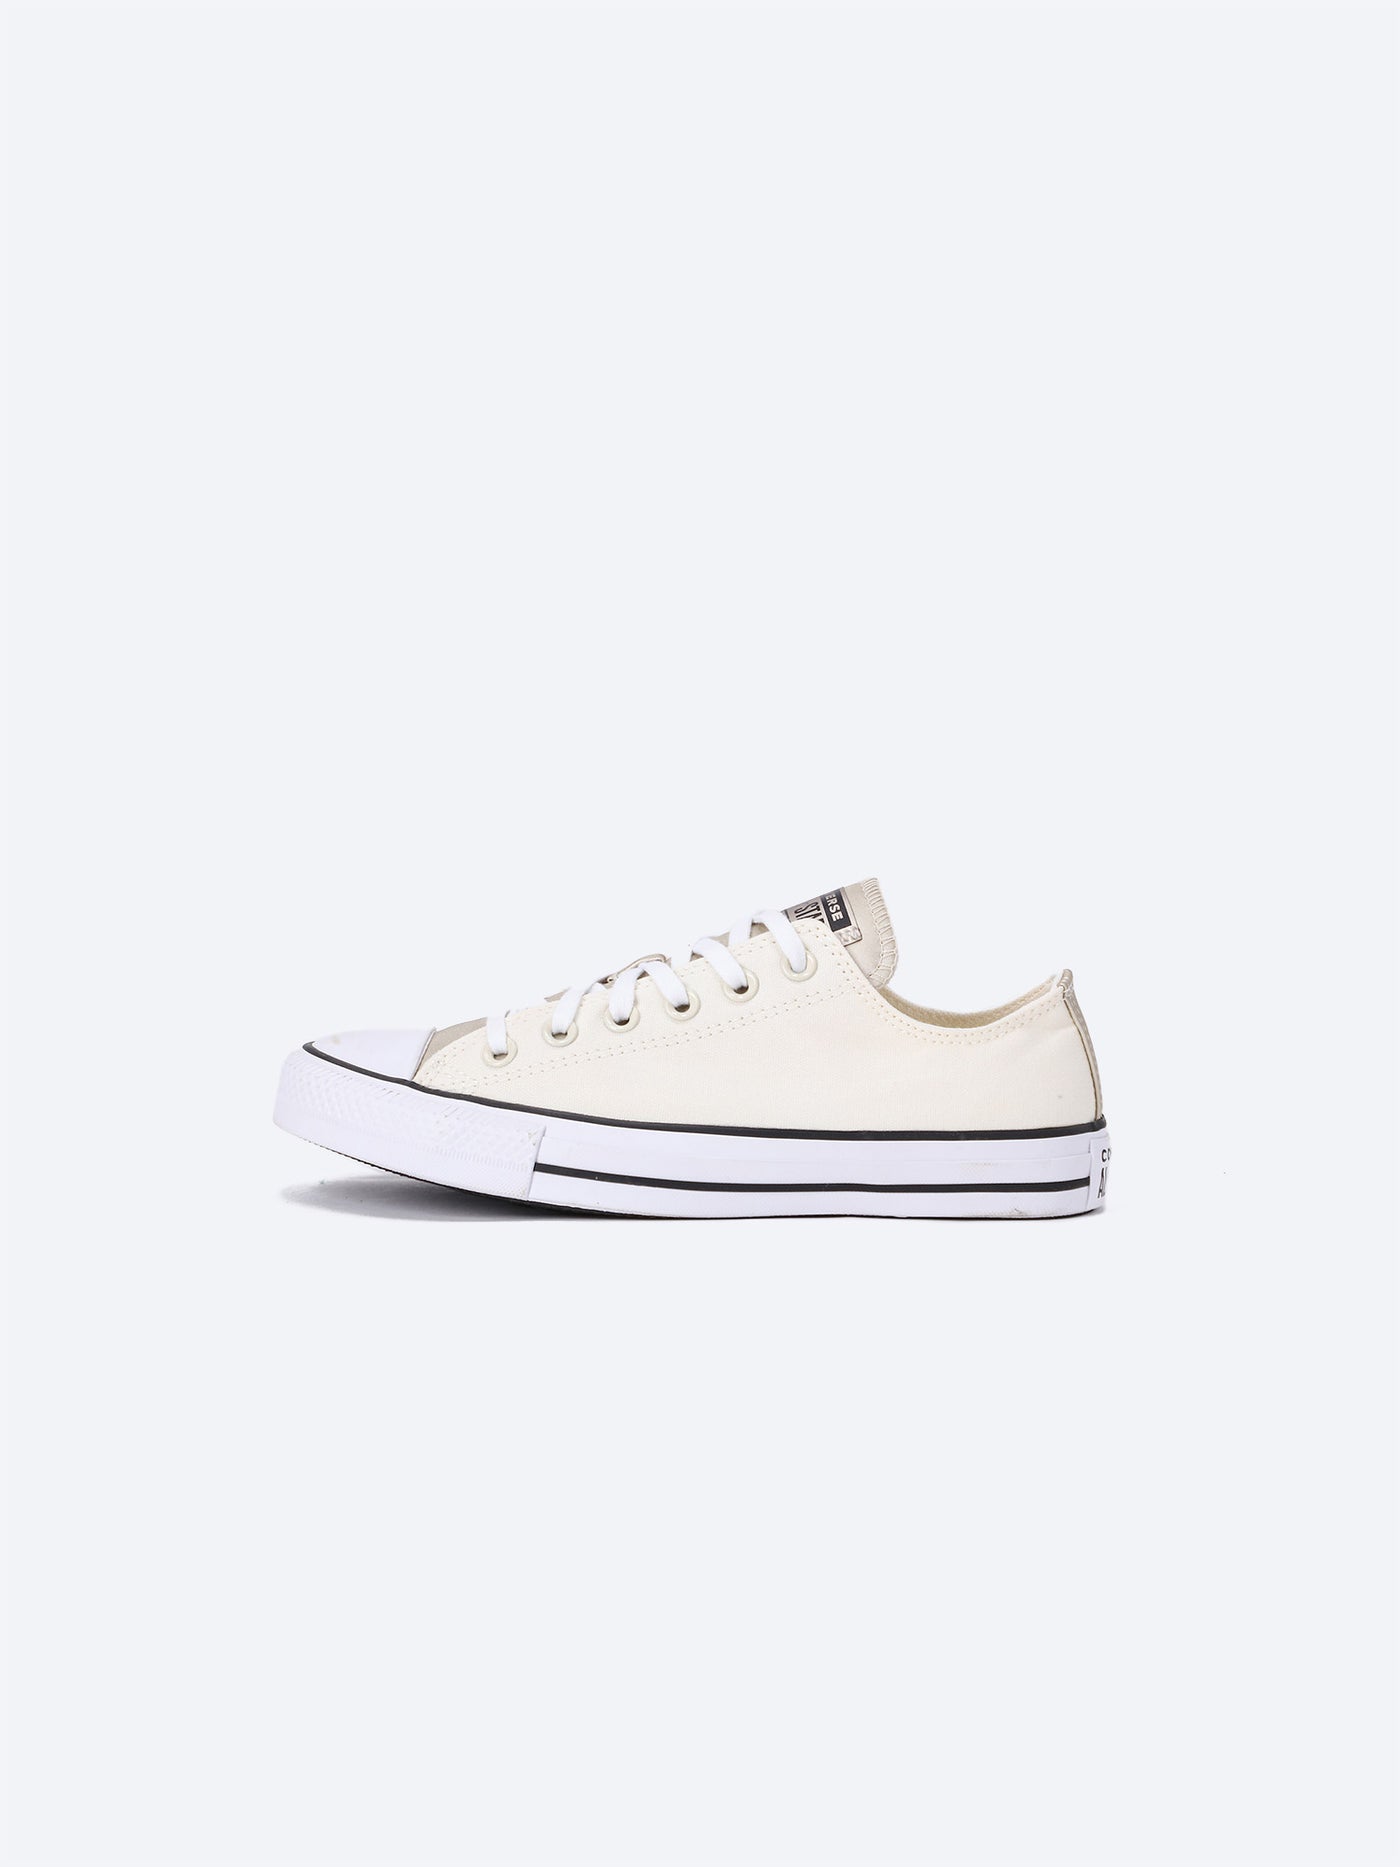 Converse Women's Chuck Taylor All Star Low Top  Sneakers -  570289C